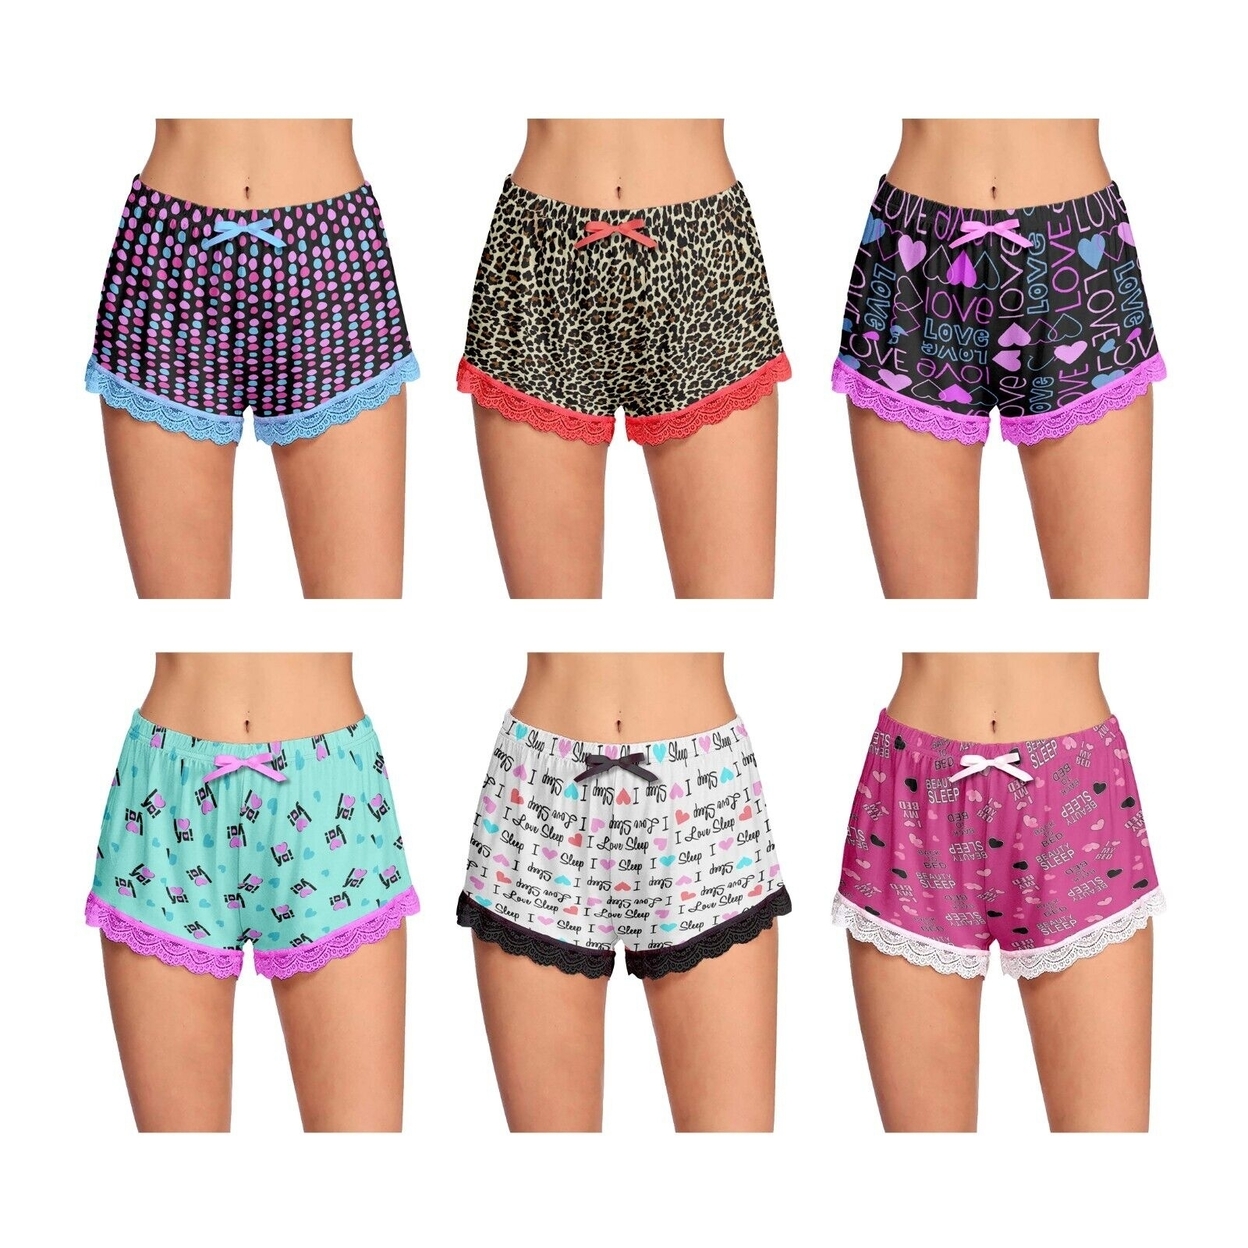 Multi-Pack: Women's Ultra-Soft Cozy Fun Printed Lace Trim Pajama Lounge Shorts - 1-pack, X-large, Shapes